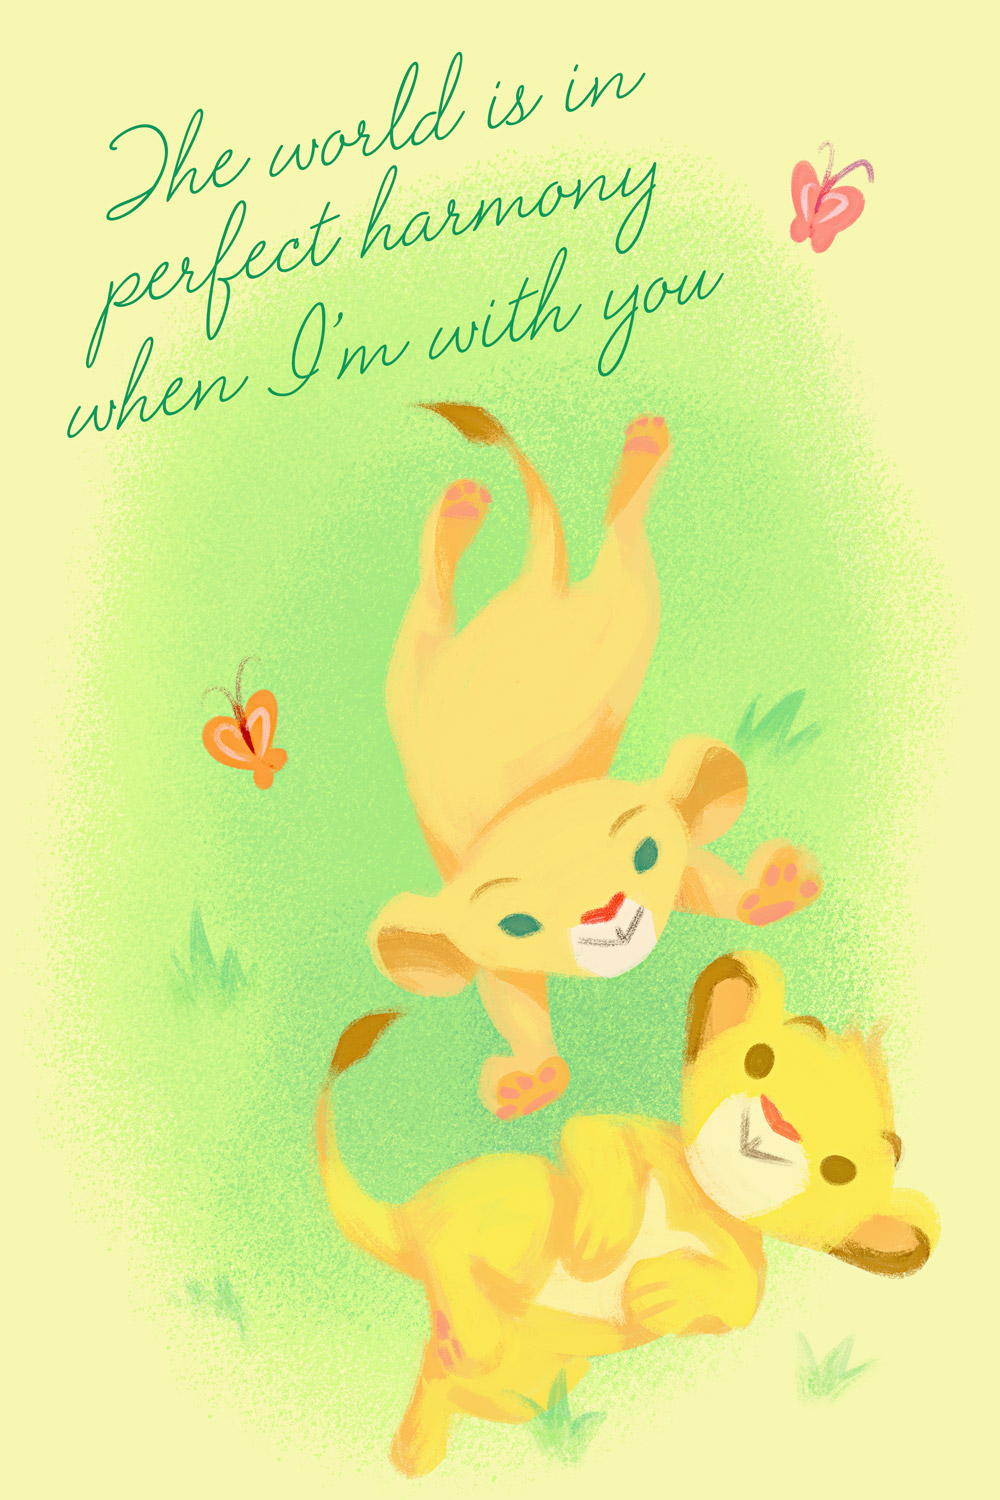 More Disney Valentine’s Day Cards from Disney Style